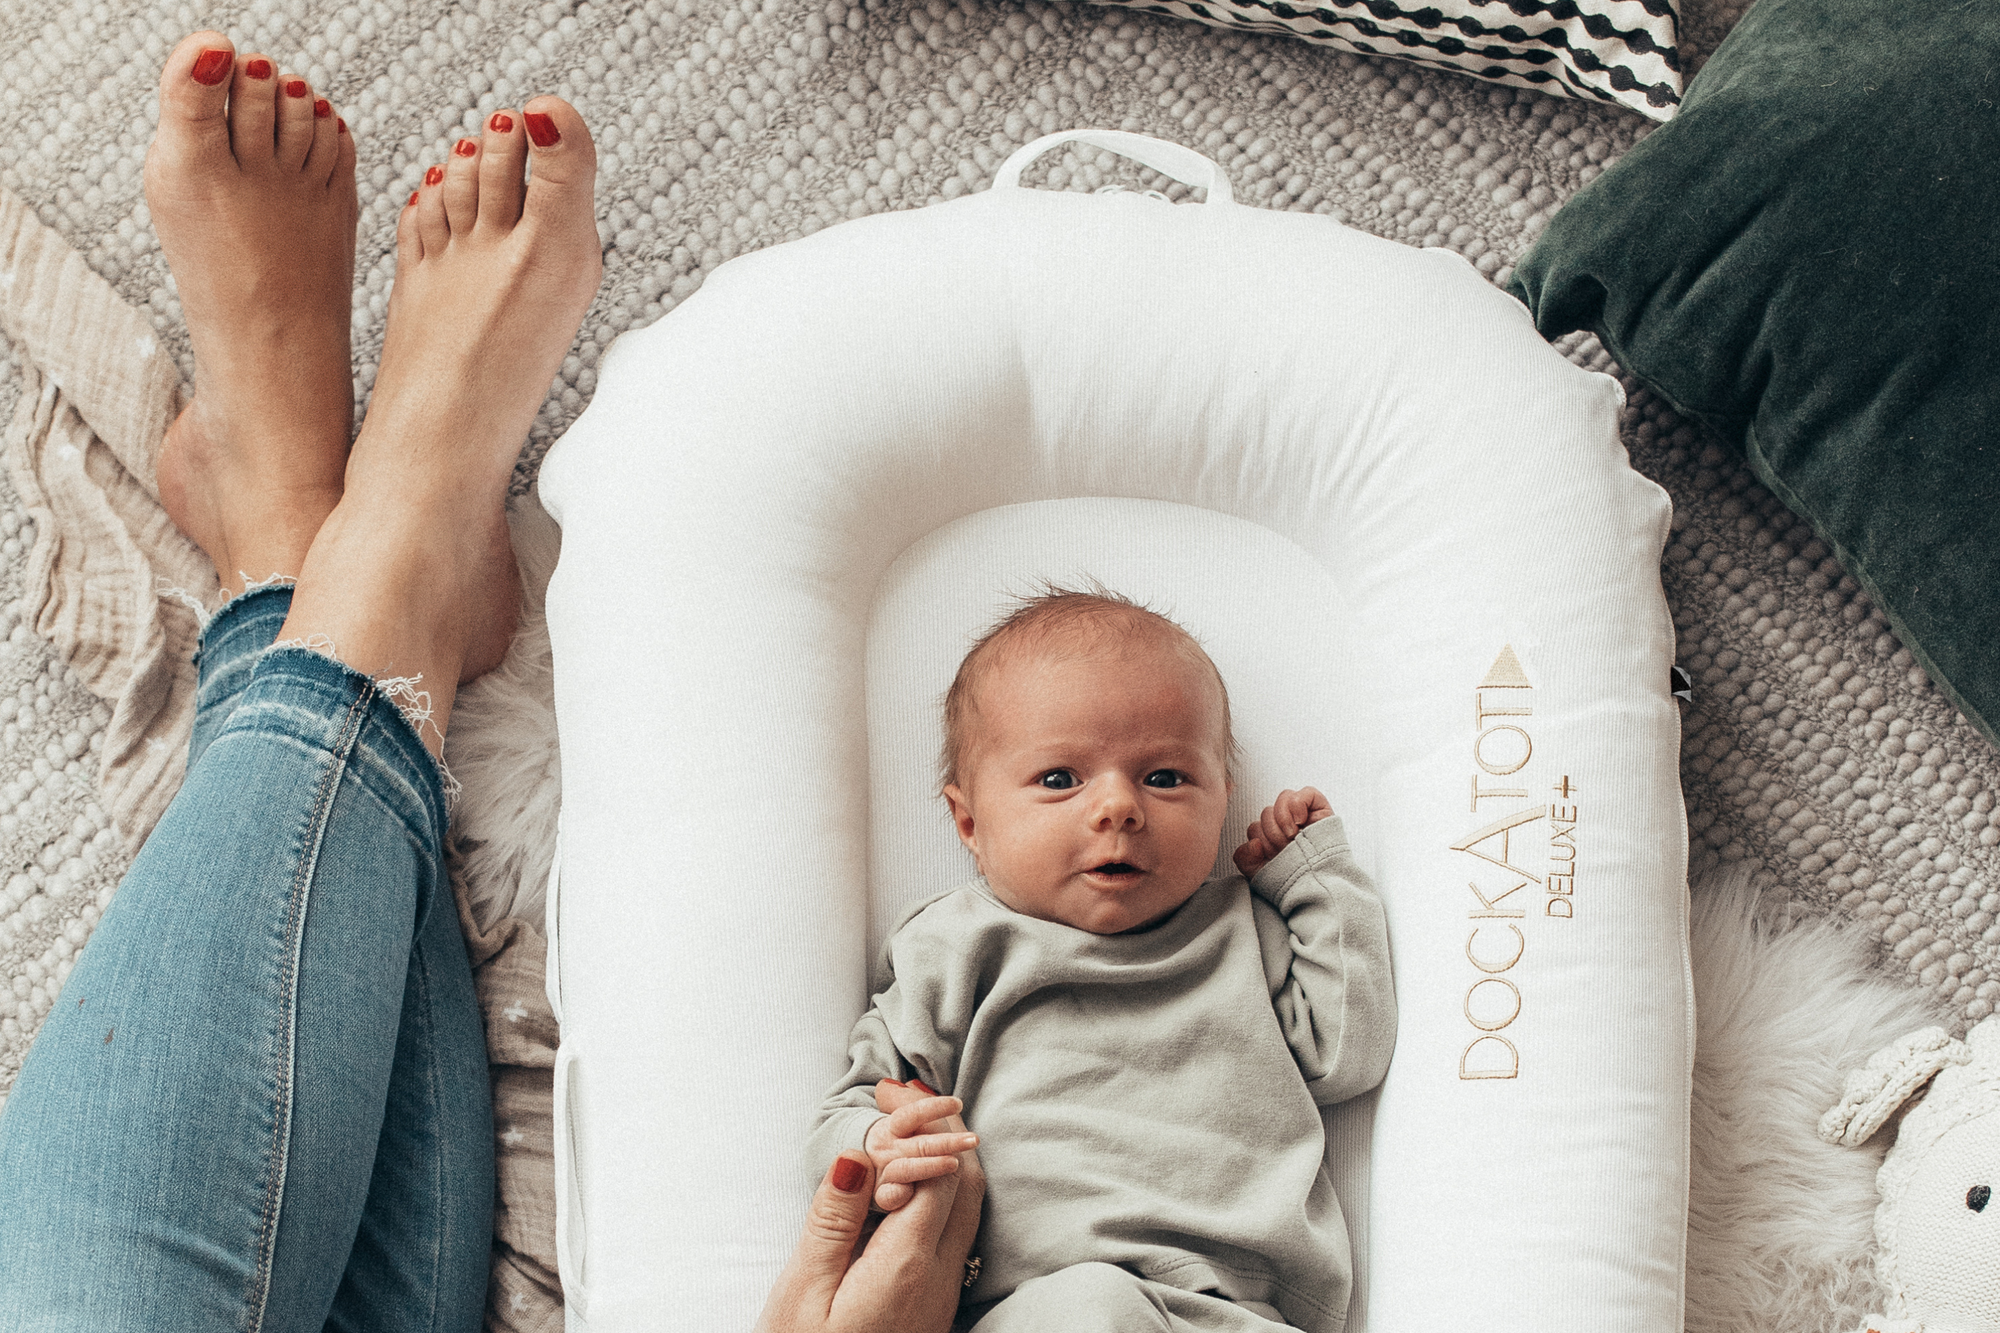 The Top 10 Things I've Learned as a New Mum by Jenna Kutcher